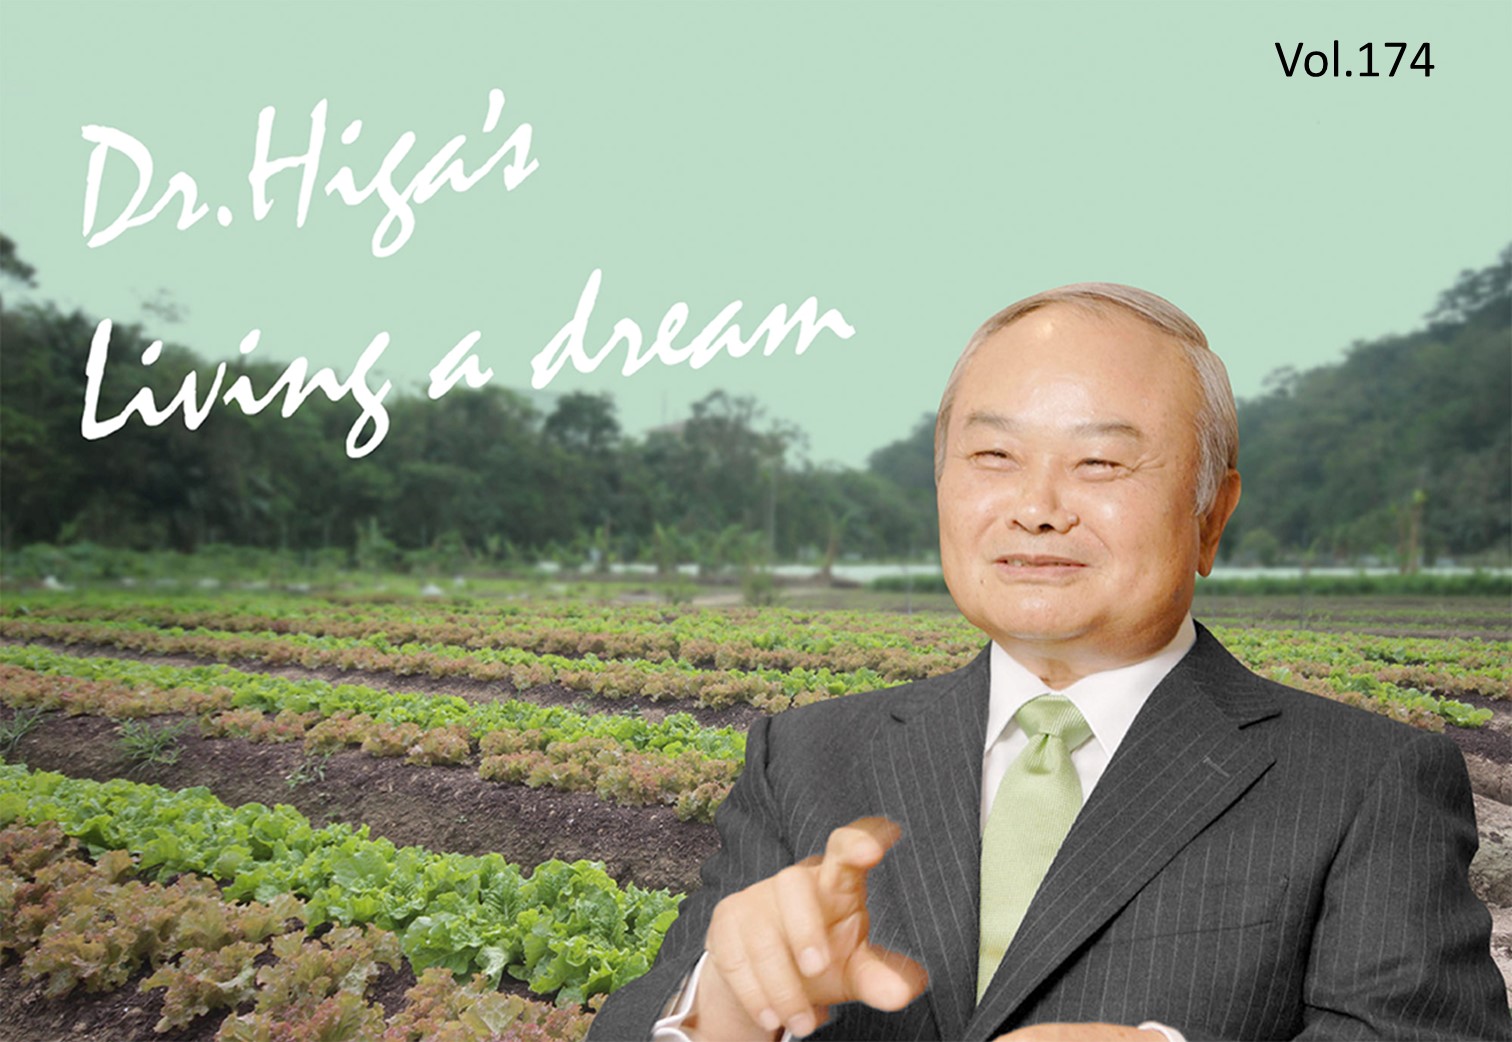 Dr. Higa's "Living a Dream": the latest article #174 is up!!!